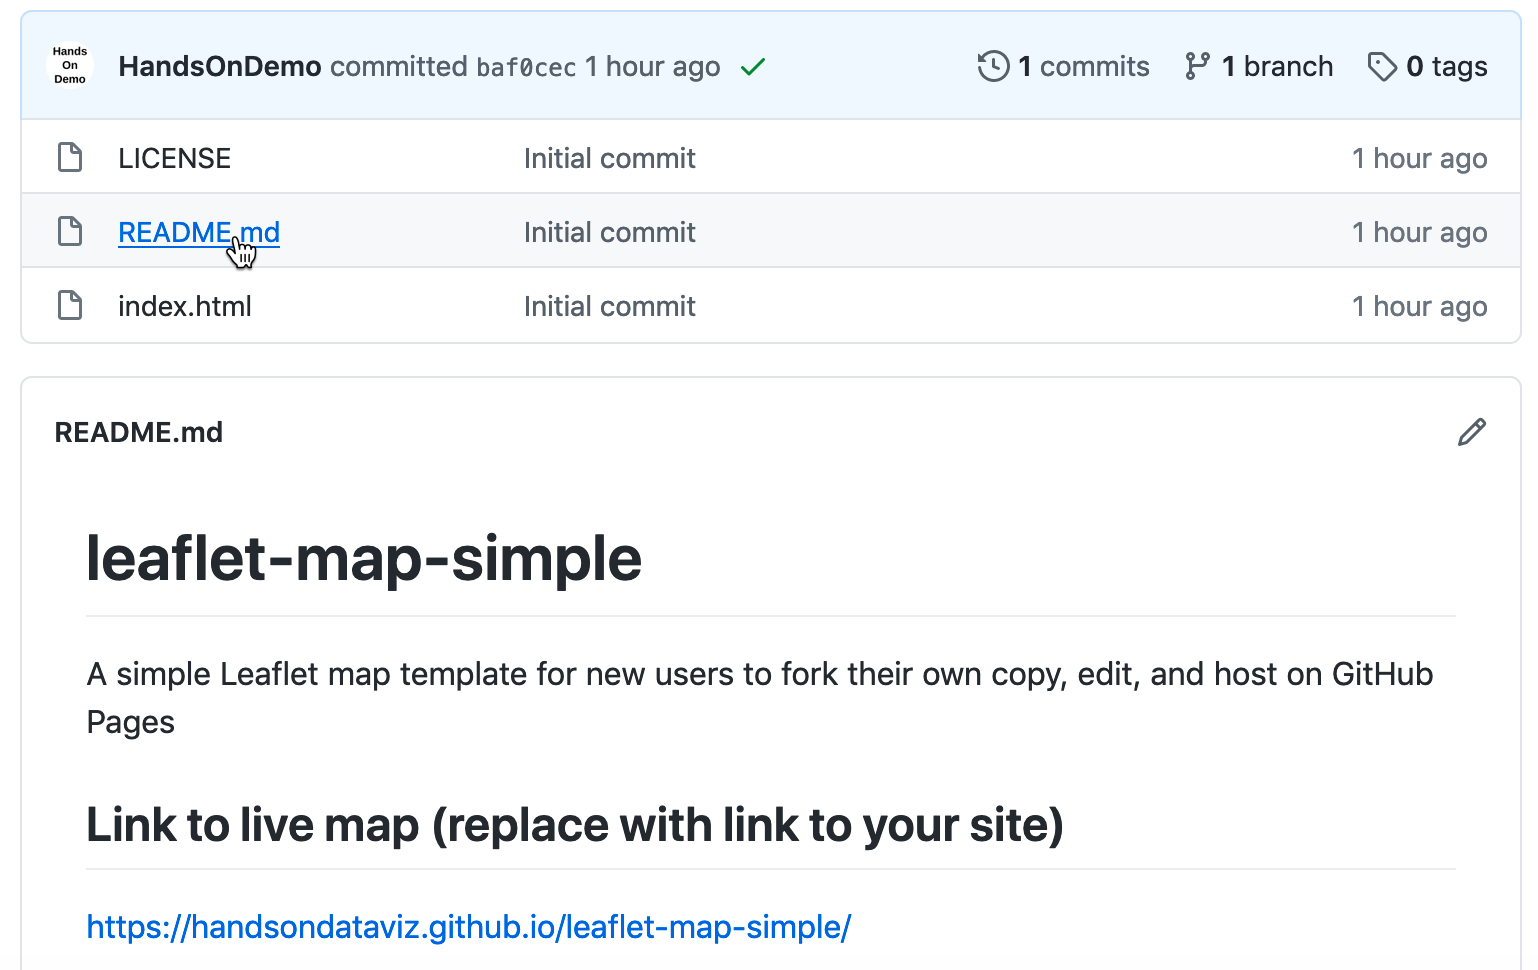 Open and edit the README file to paste the link to your live map.